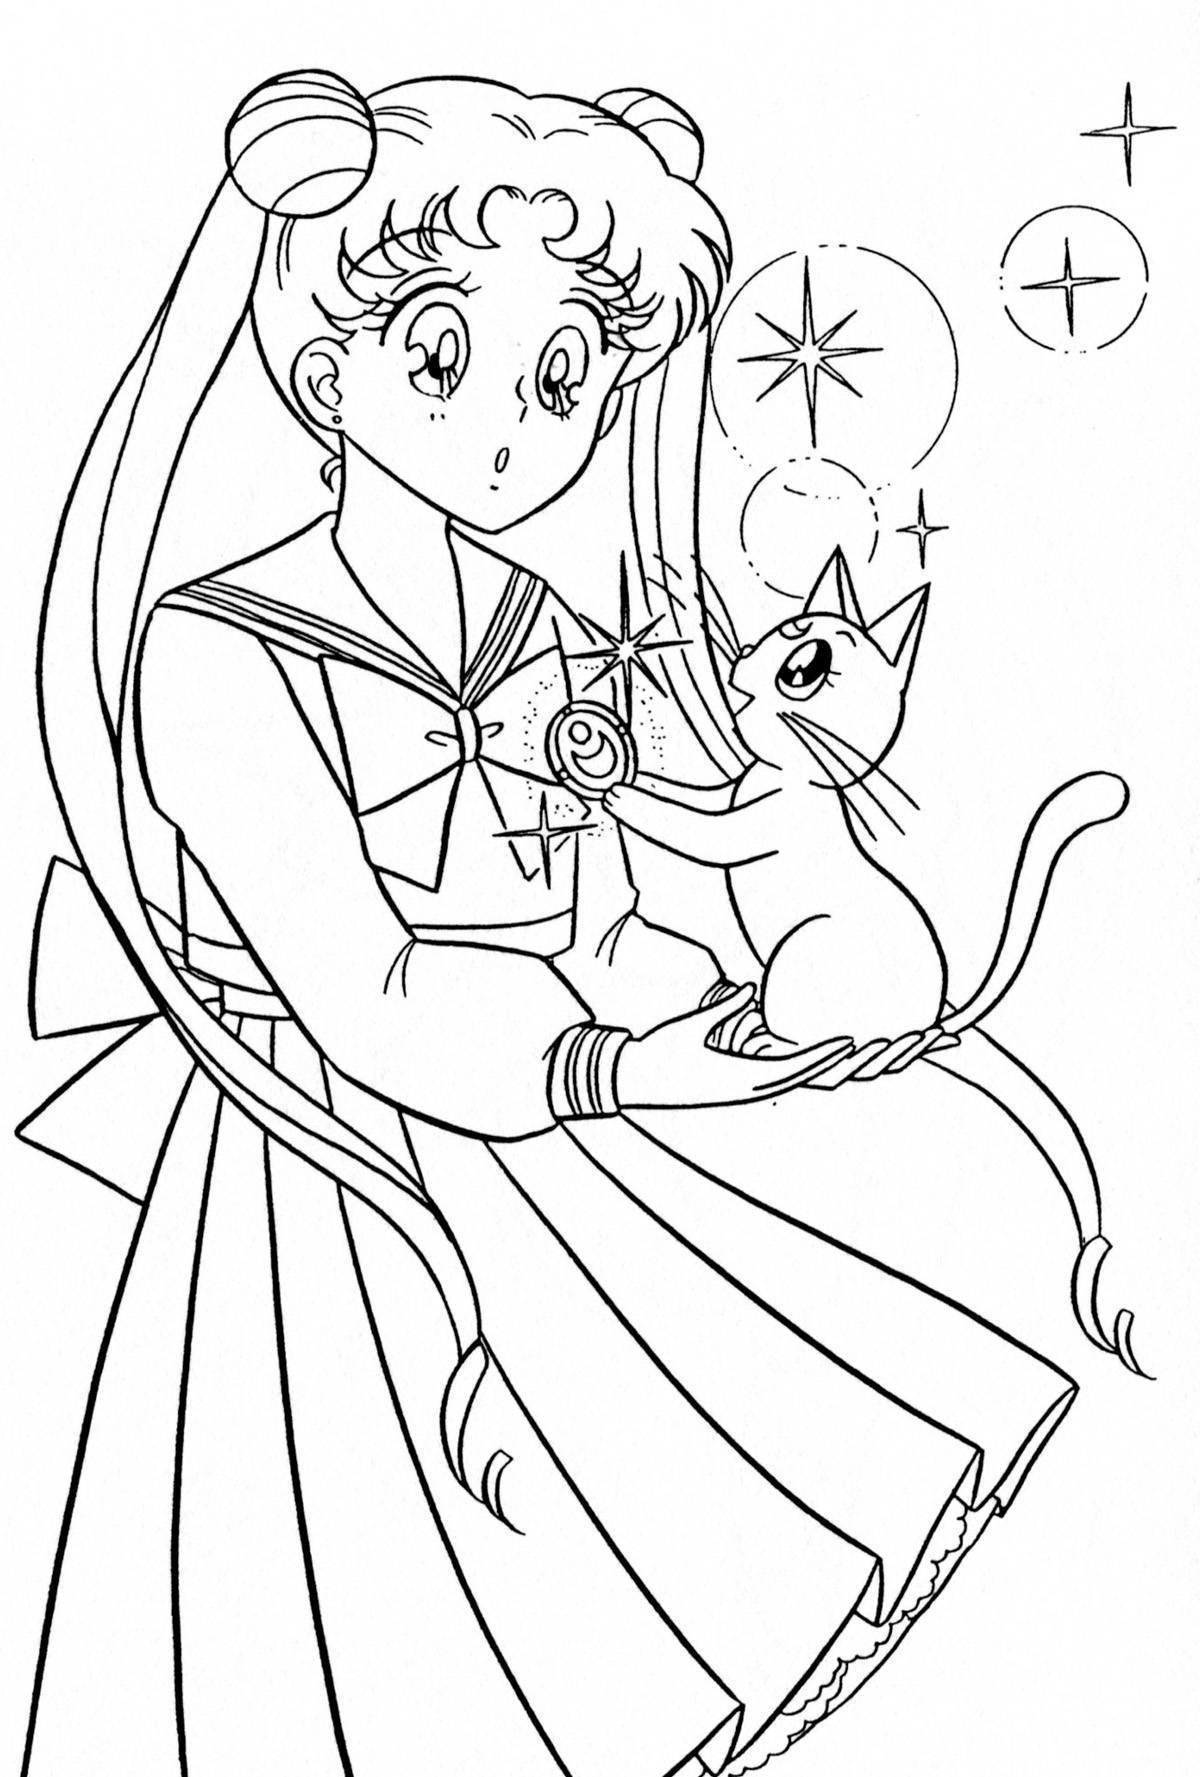 Amazing Sailor Moon Coloring Page